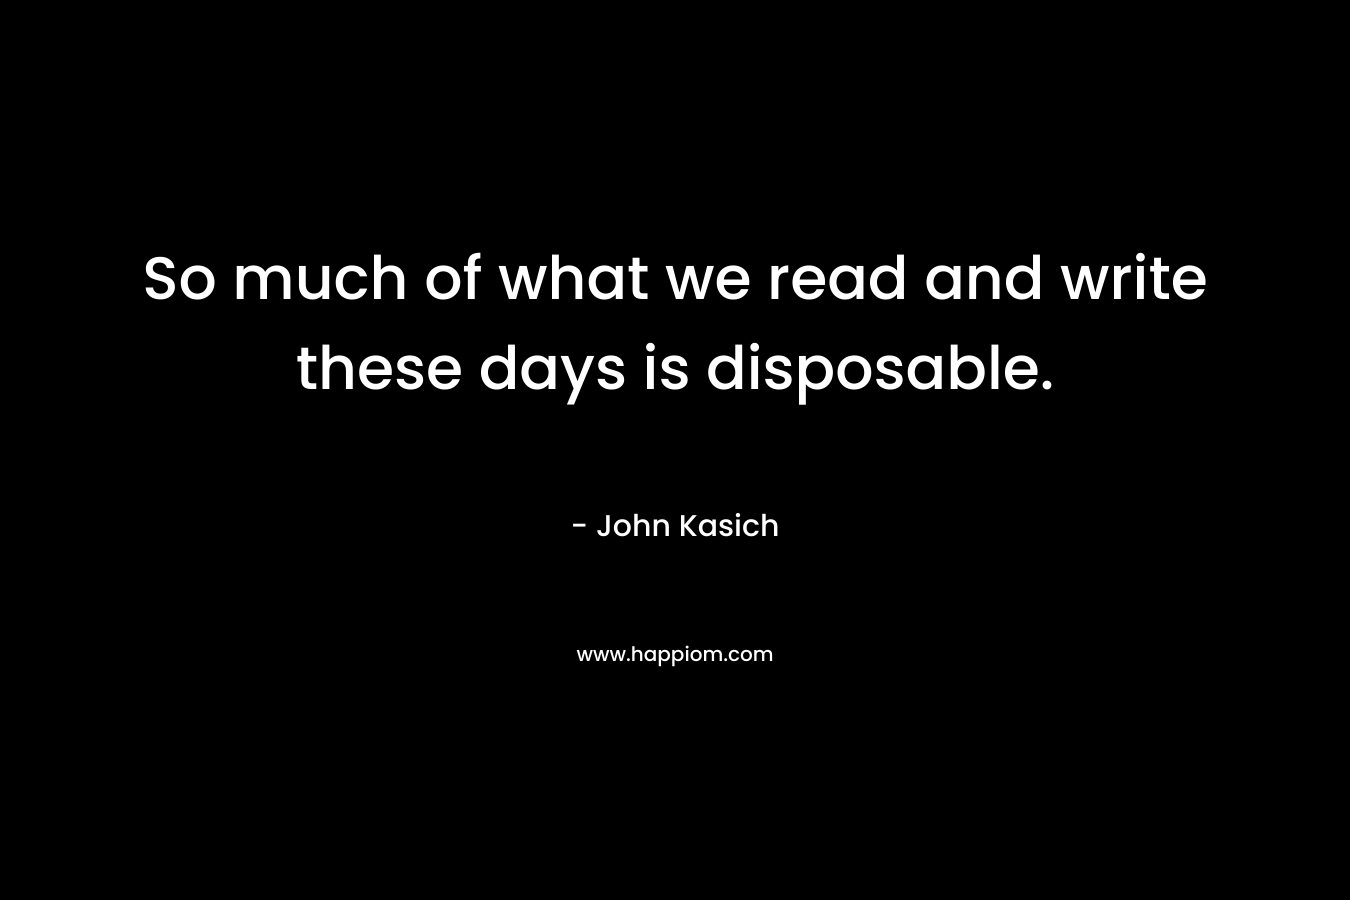 So much of what we read and write these days is disposable. – John Kasich